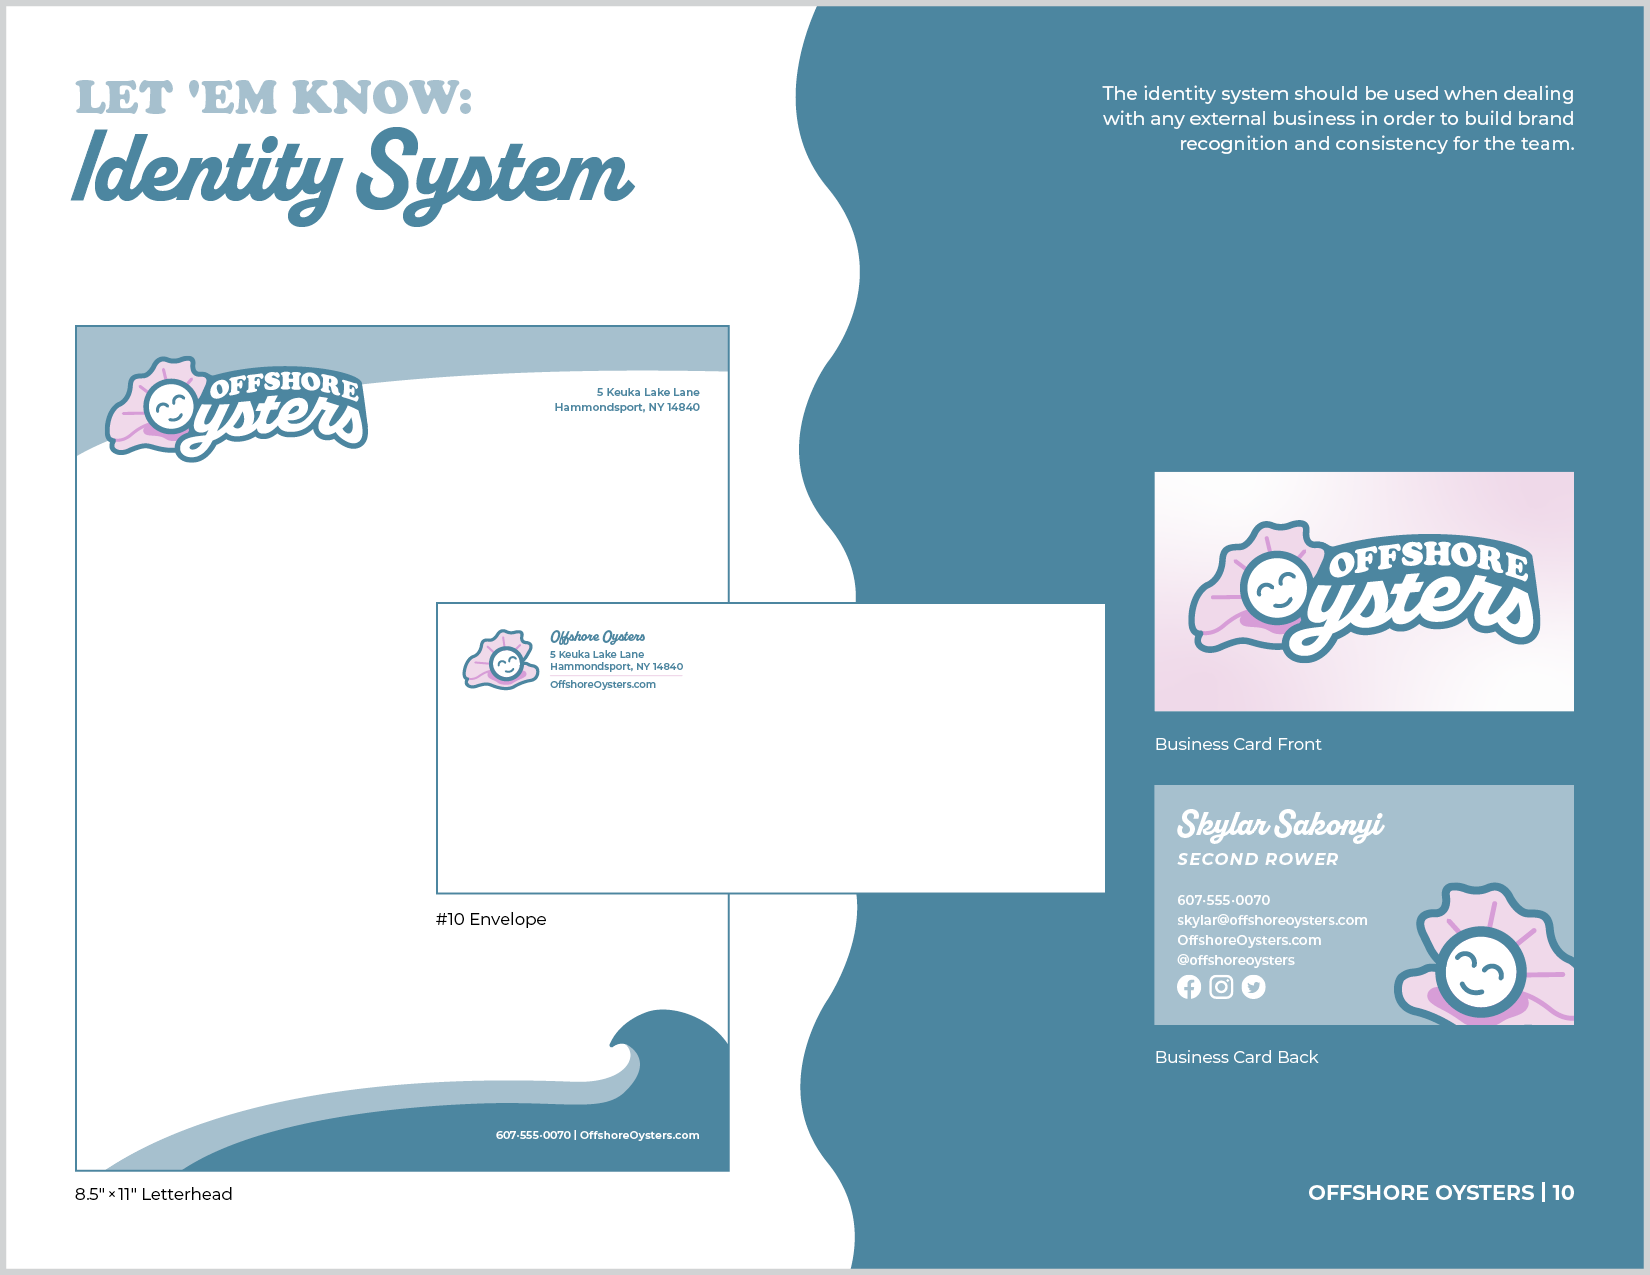 Offshore Oysters brand guideline identity system.